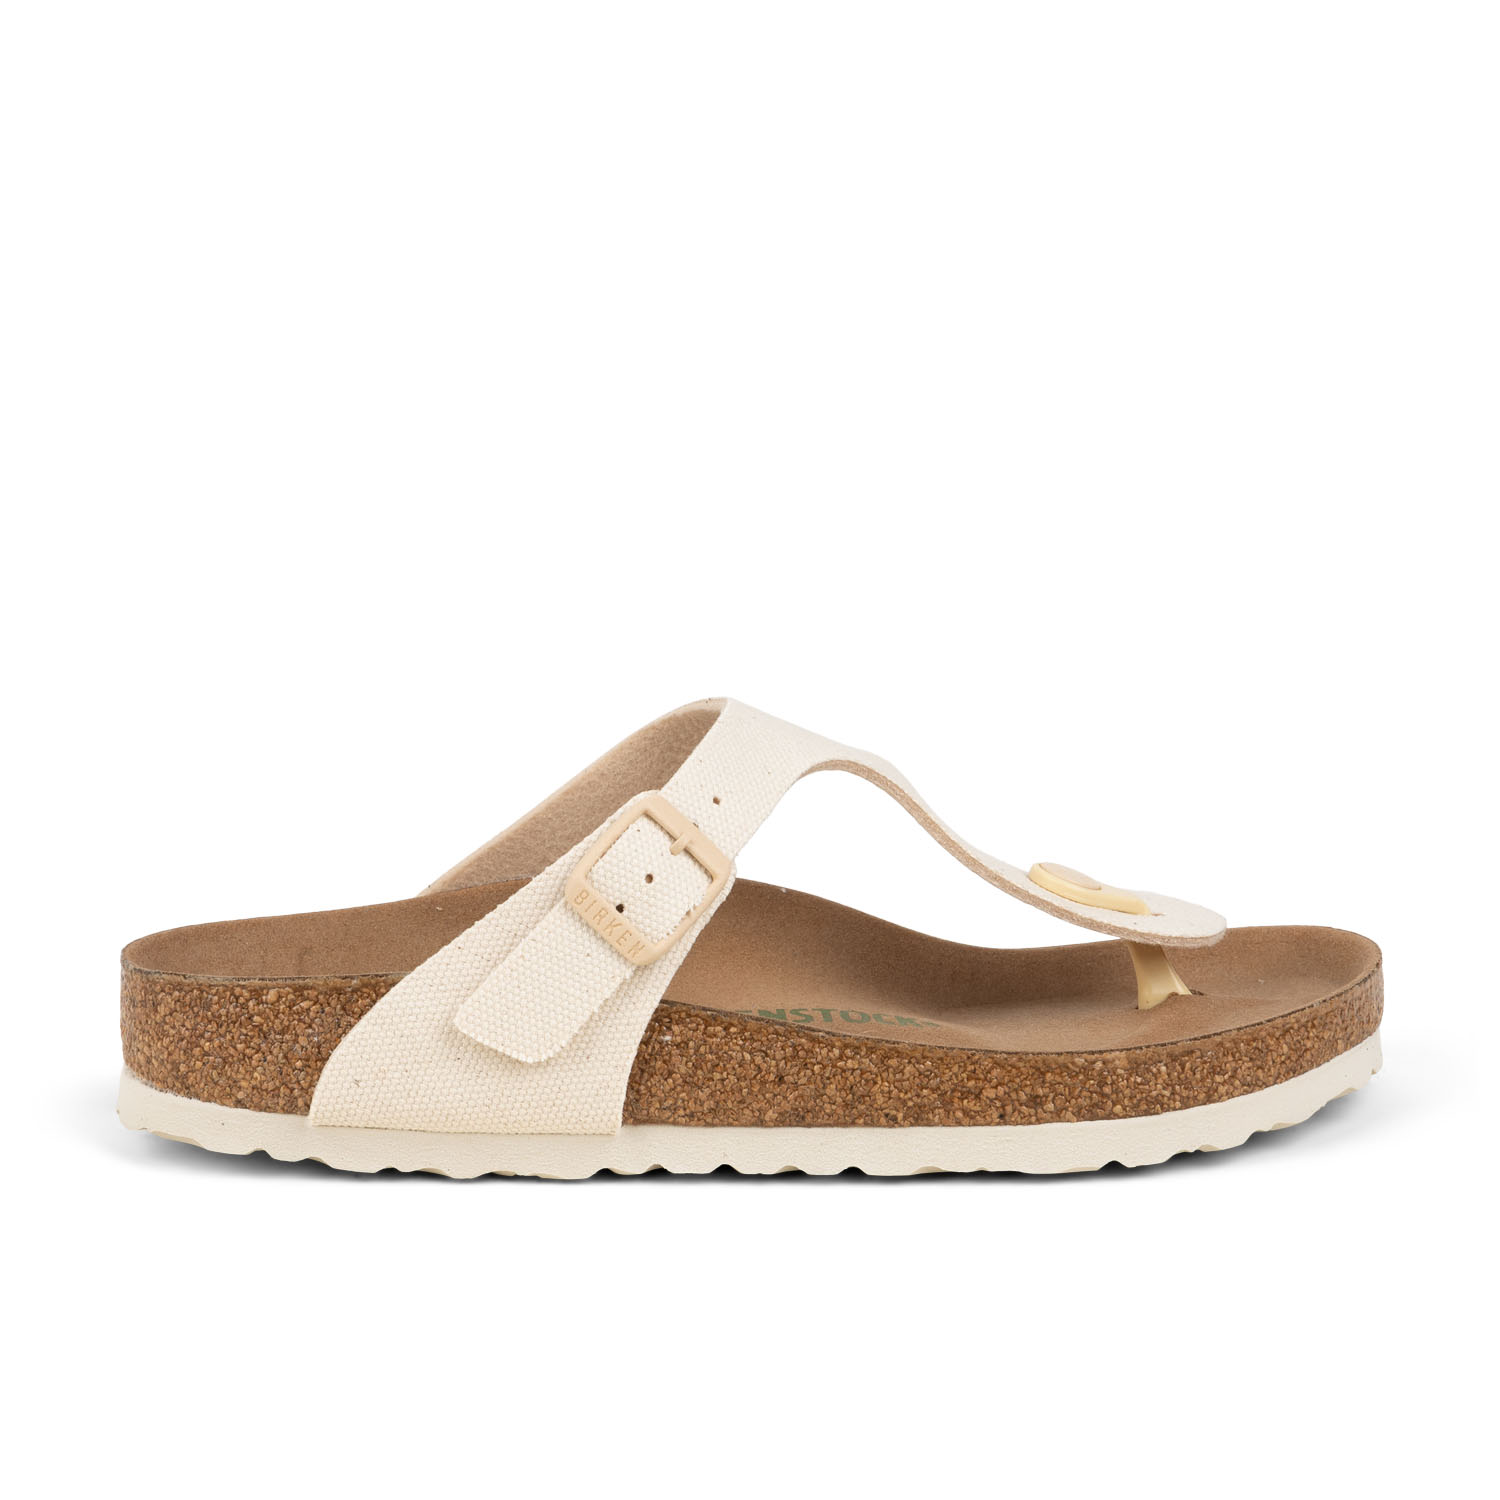 01 - GIZEH TEX - BIRKENSTOCK - Sandales - Cuir / synthétique